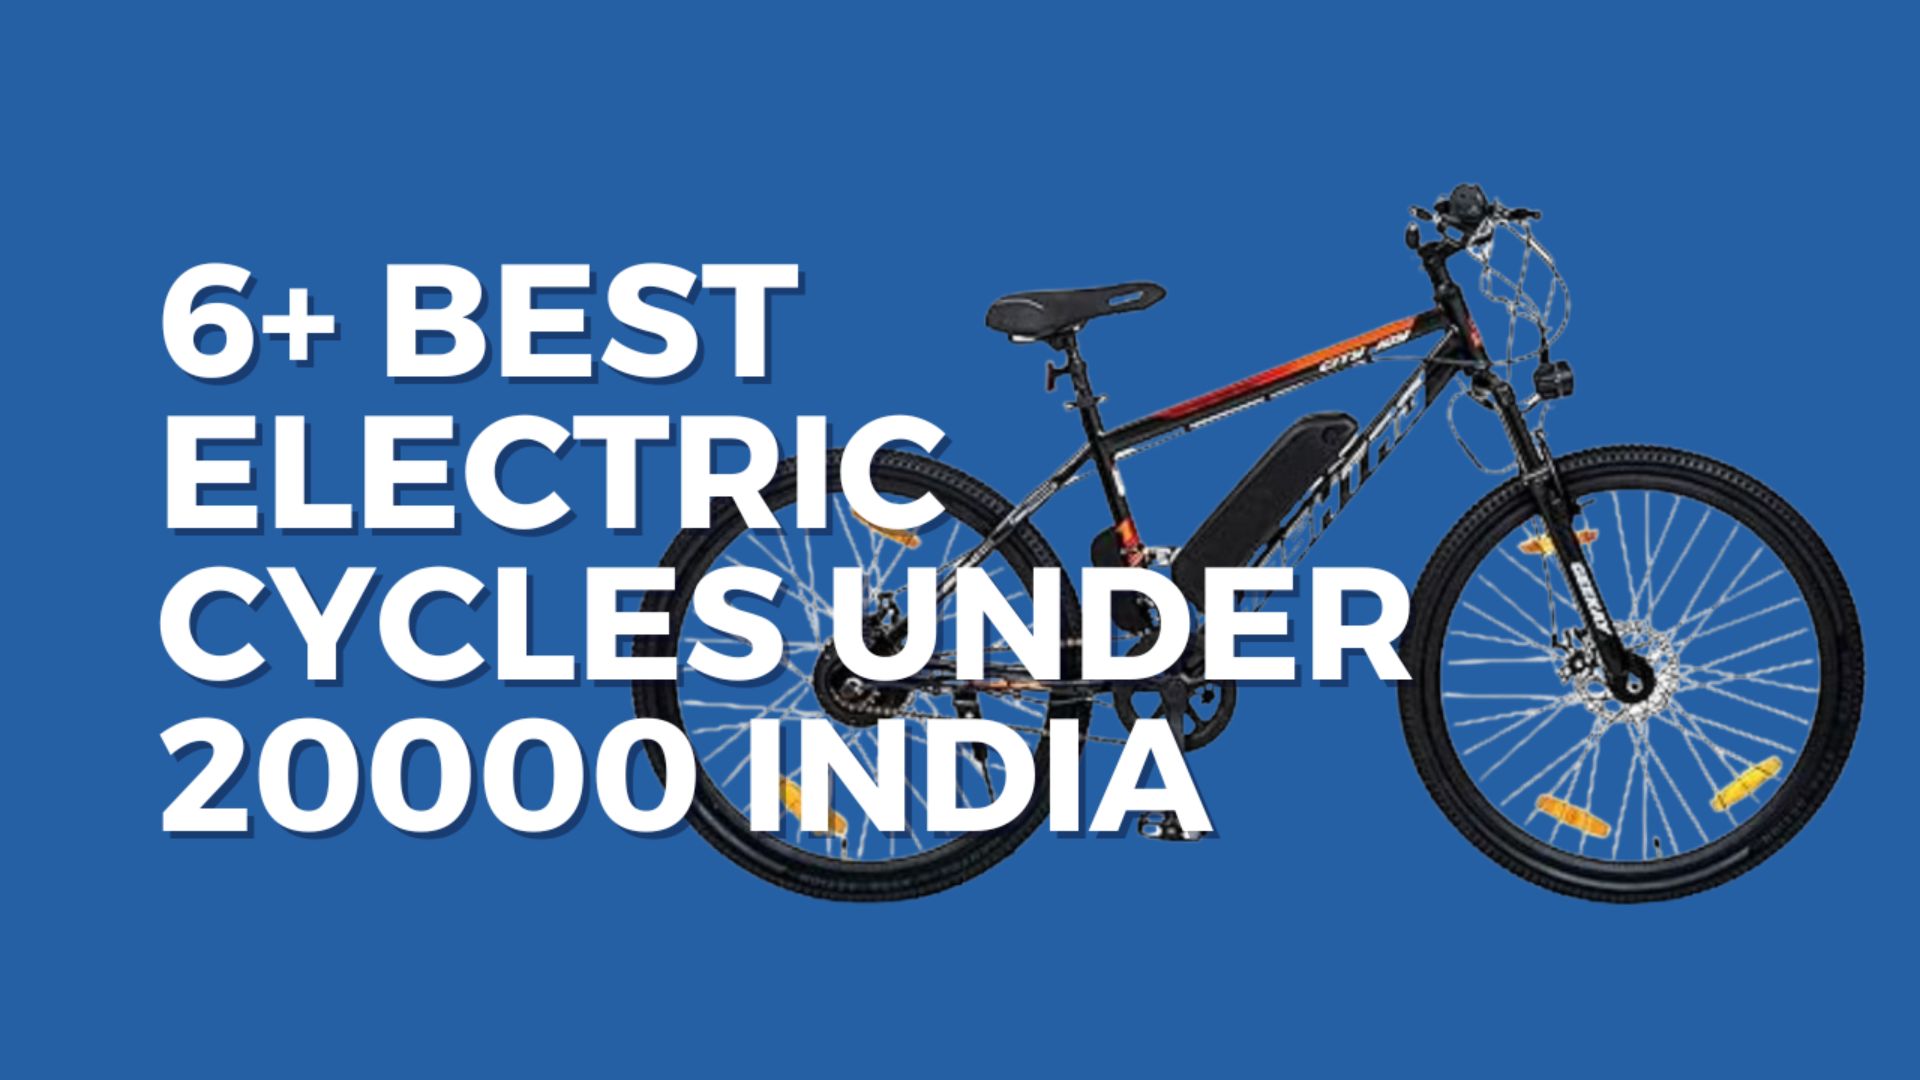 6+ Best Electric Cycles Under 20000 India